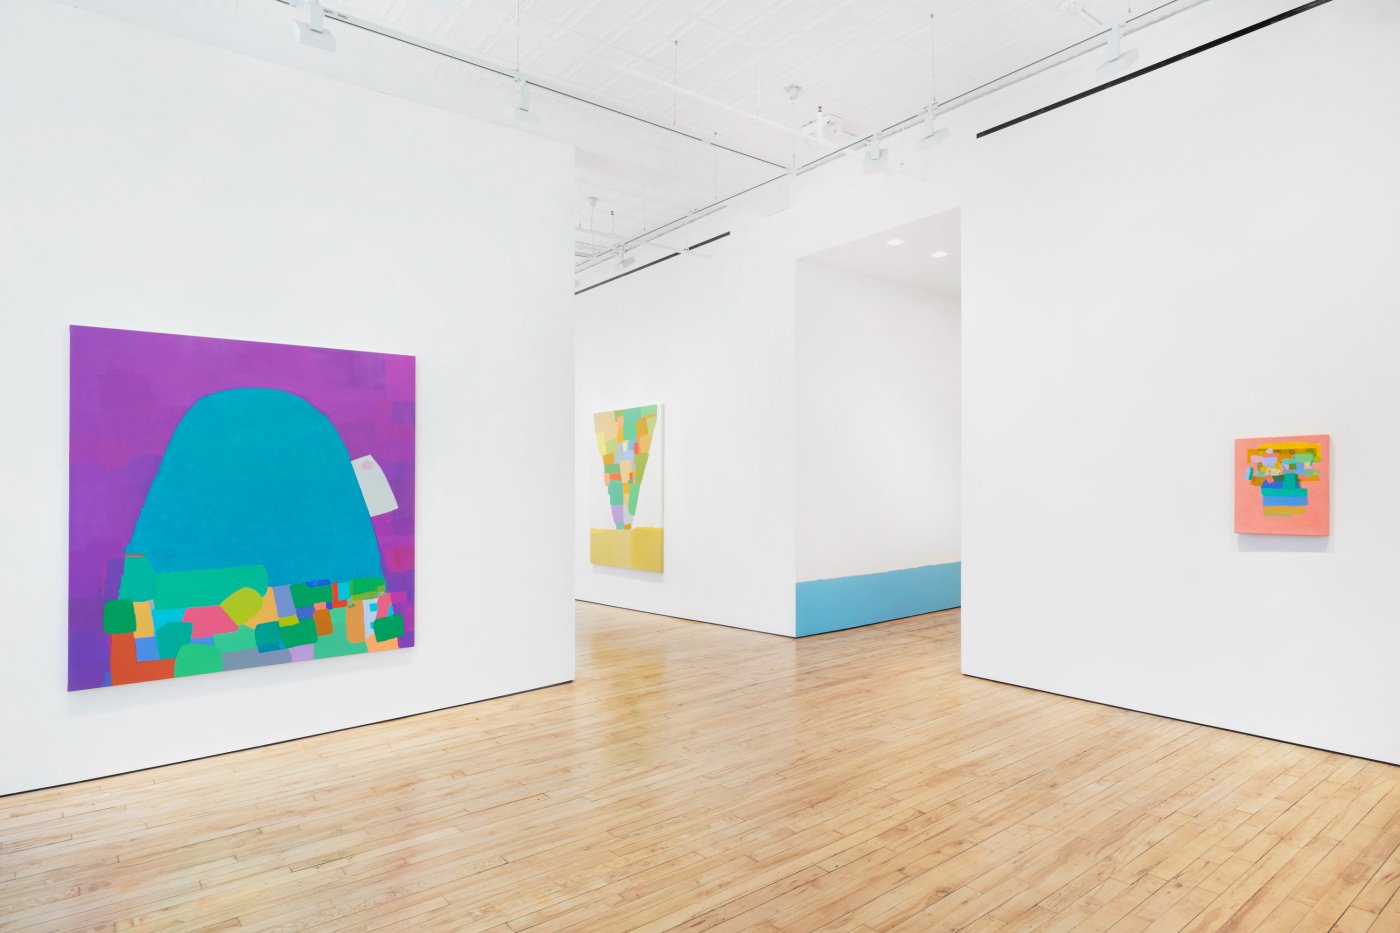 Installation image for Federico Herrero, at James Cohan Gallery